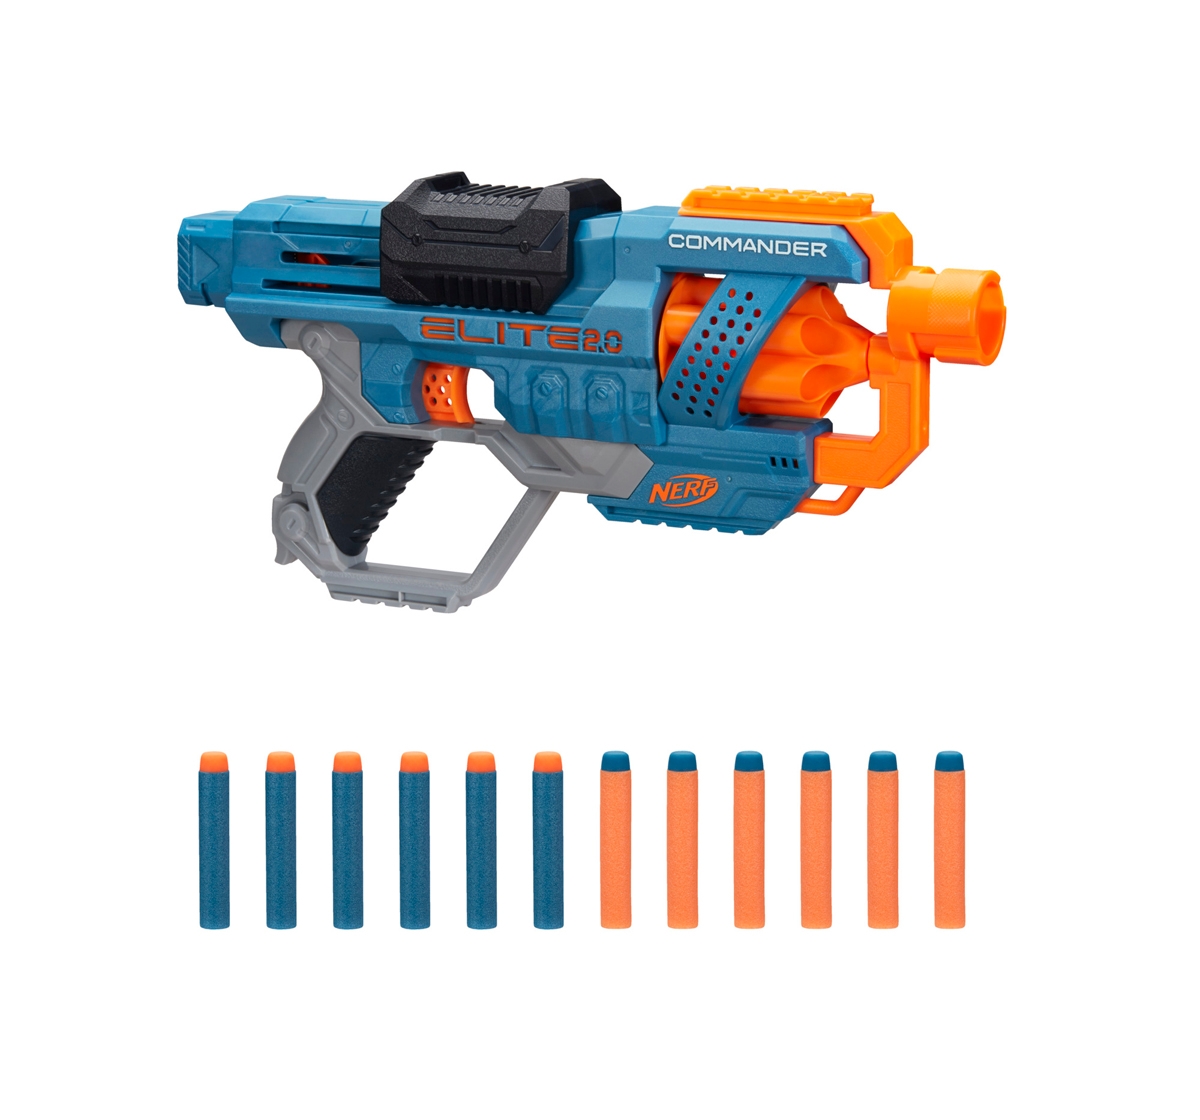 Nerf | Nerf Elite 2.0 Commander RD 6 Blaster 12 Official Nerf Darts with Rotating Drum for Kids 8Y+, Multicolour